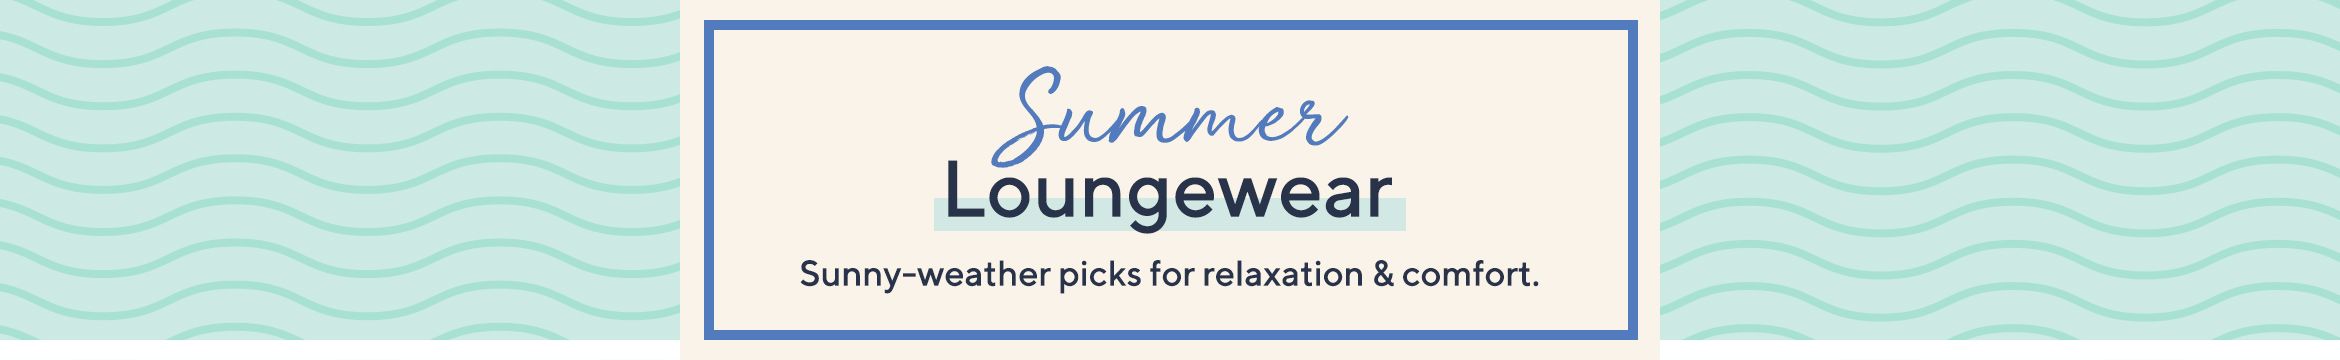 Summer Loungewear.  Sunny-weather picks for relaxation & comfort.